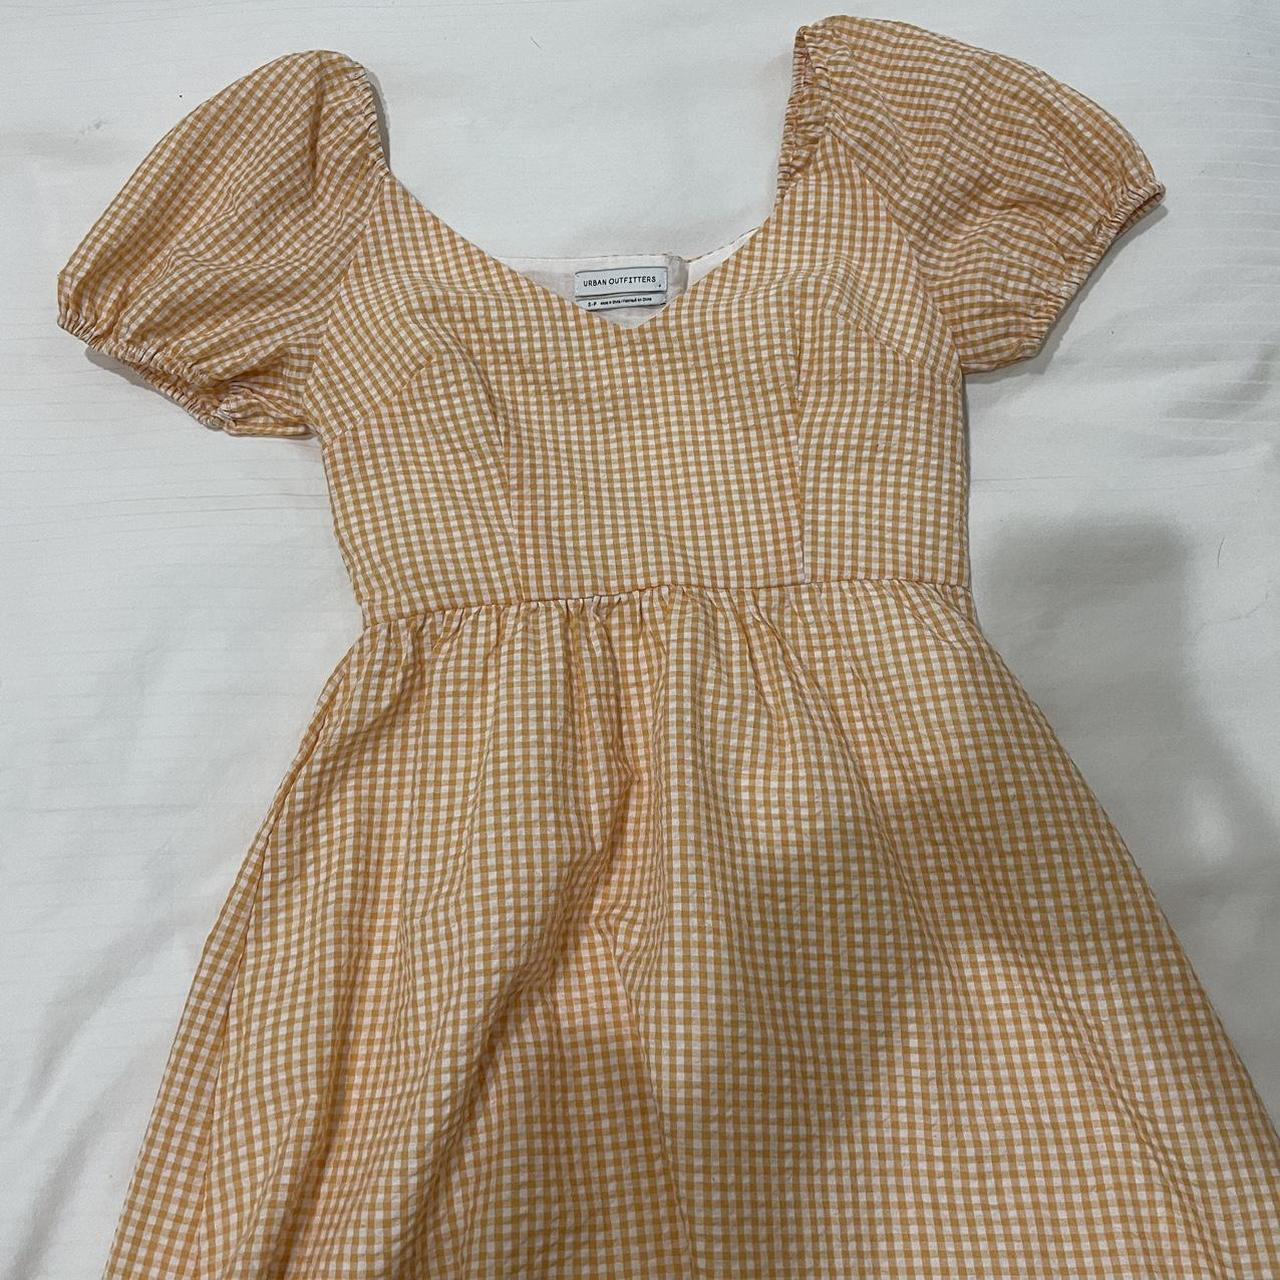 Super cute Urban outfitters ivory / cream gingham - Depop